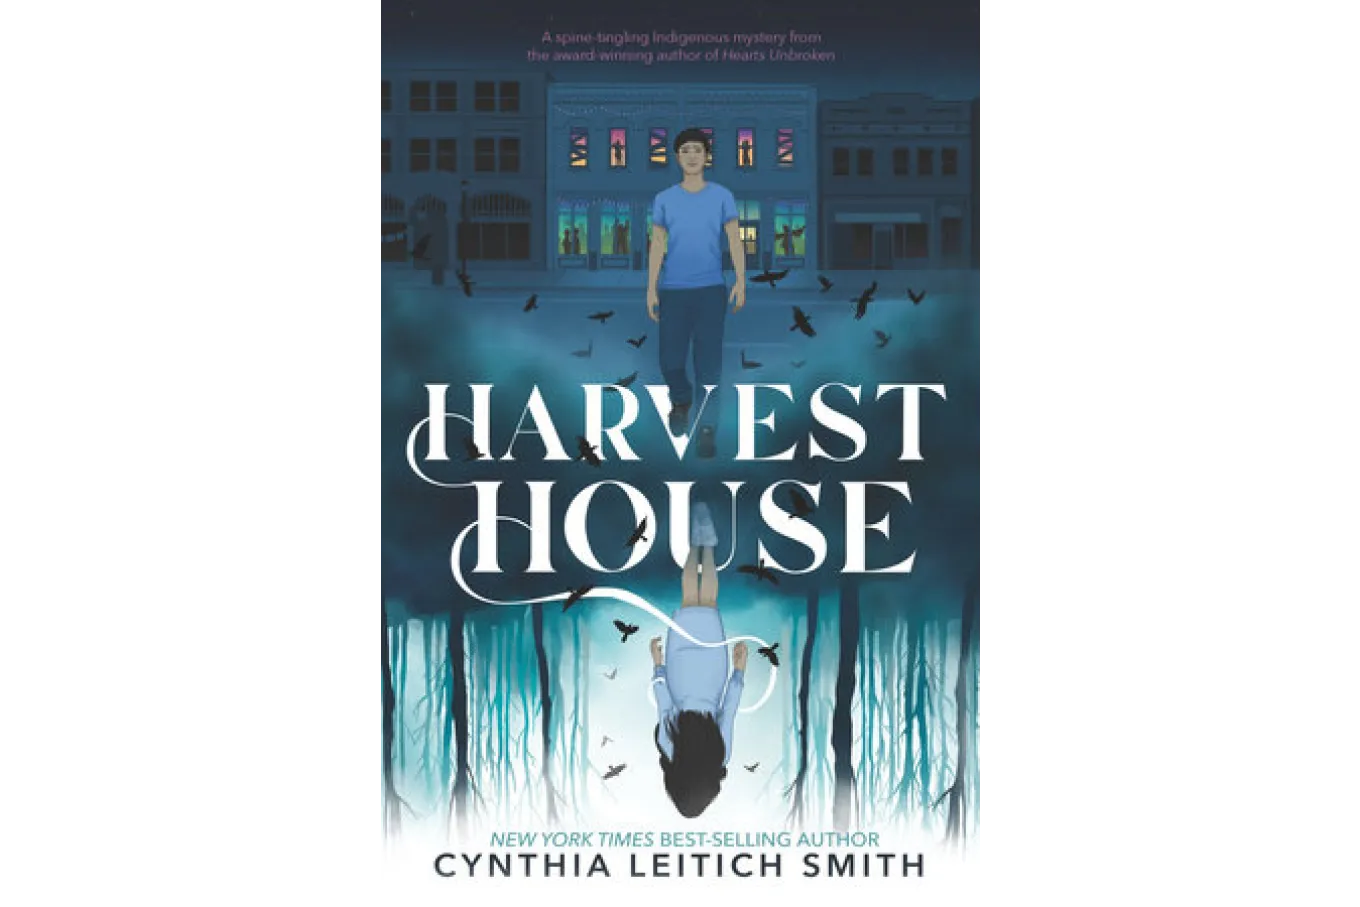 Cover of Harvest House